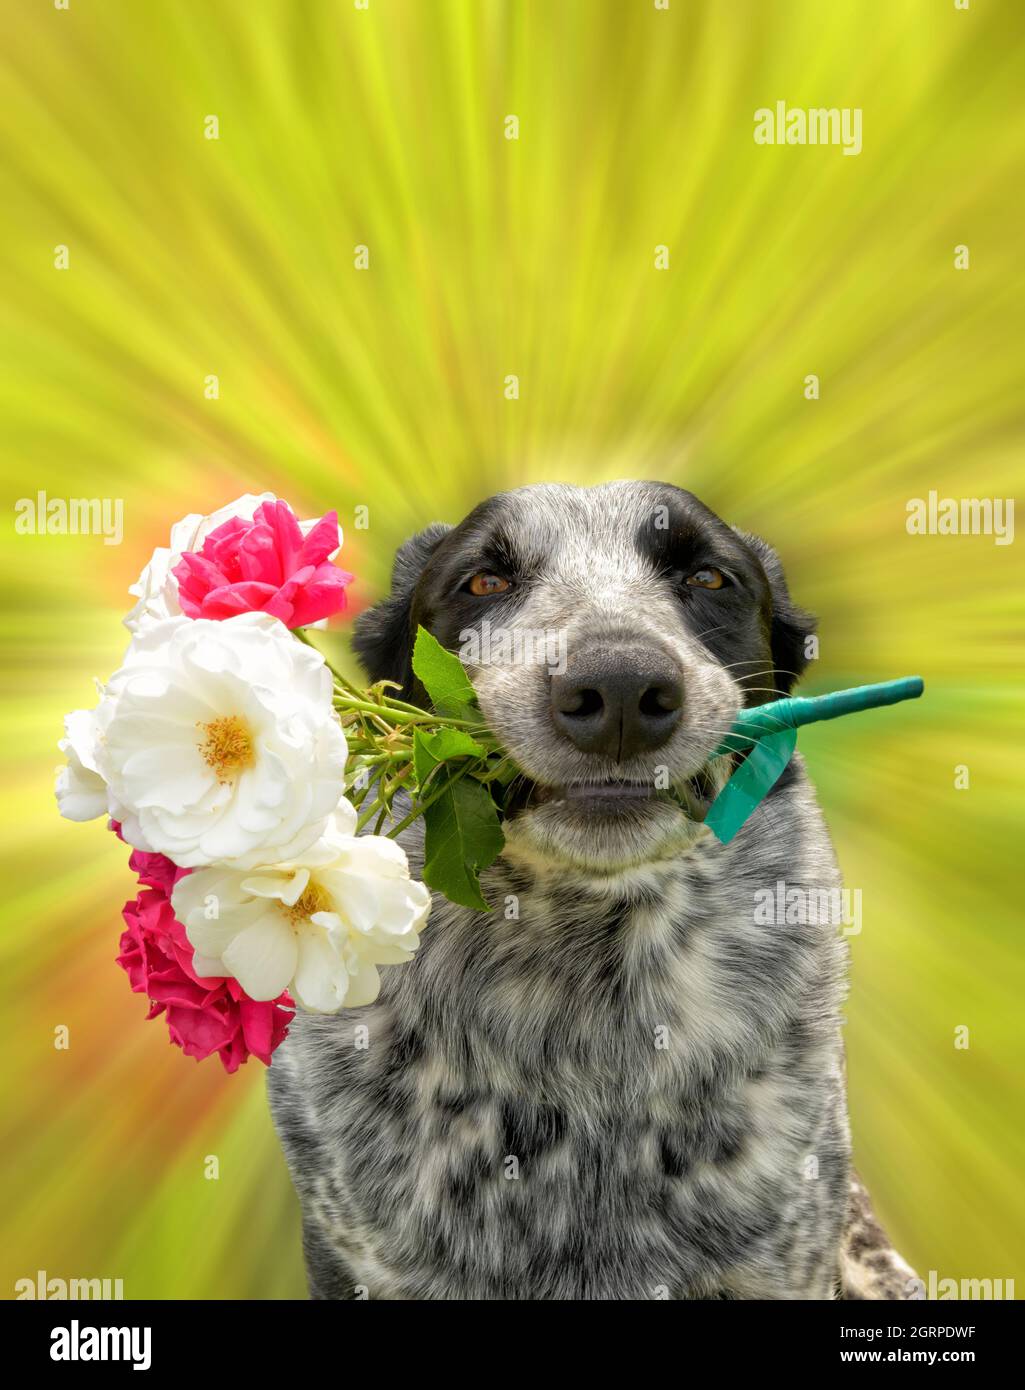 Black and white spotted dog holding pink and white roses in her mouth, with a zoom blur effect background; great for a congratulation card Stock Photo